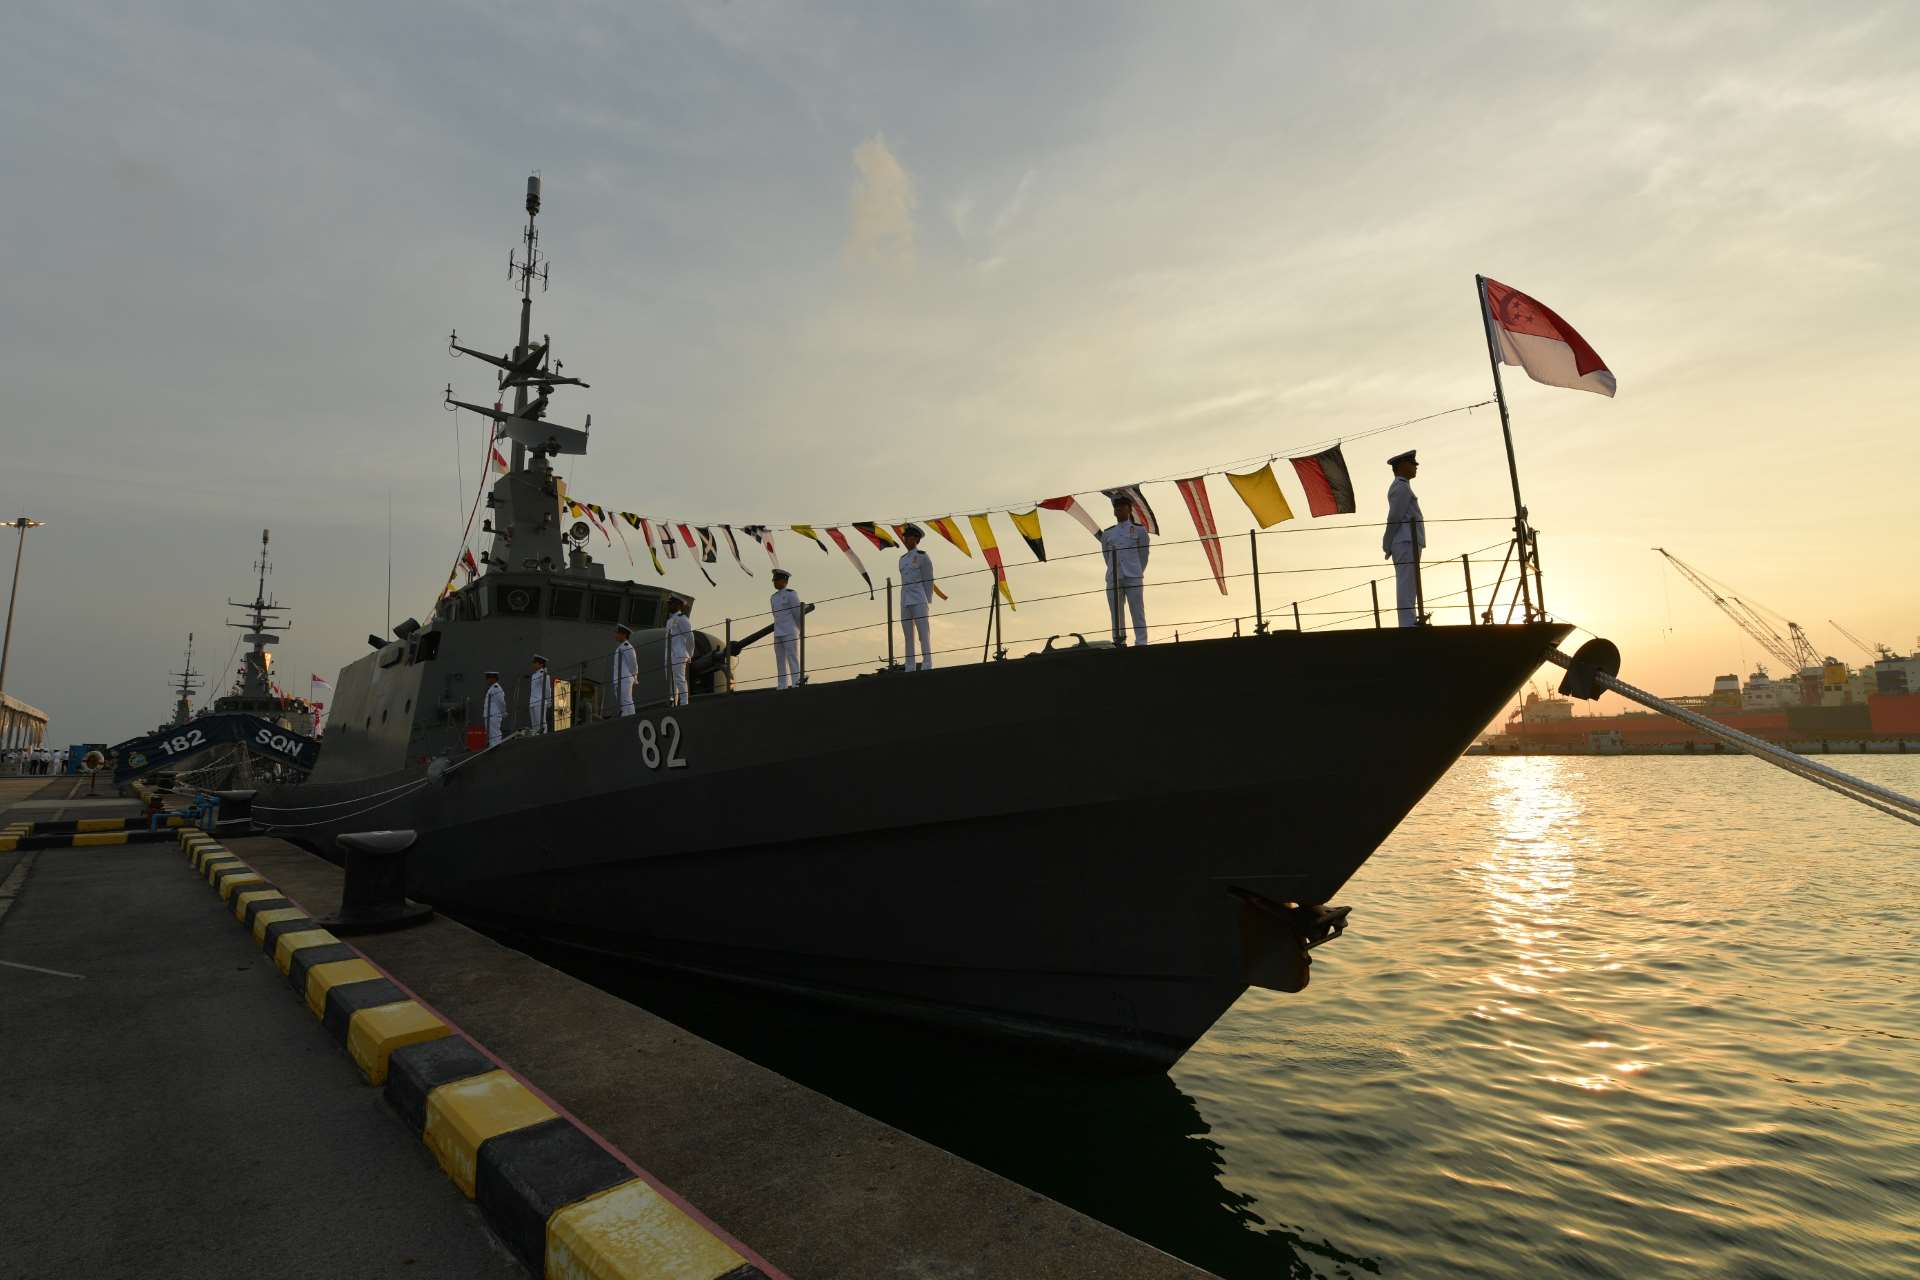 RSN Patrol Vessels RSS Resilience (foreground) and RSS Daring (background) at the decommissioning ceremony in Tuas Naval Base.